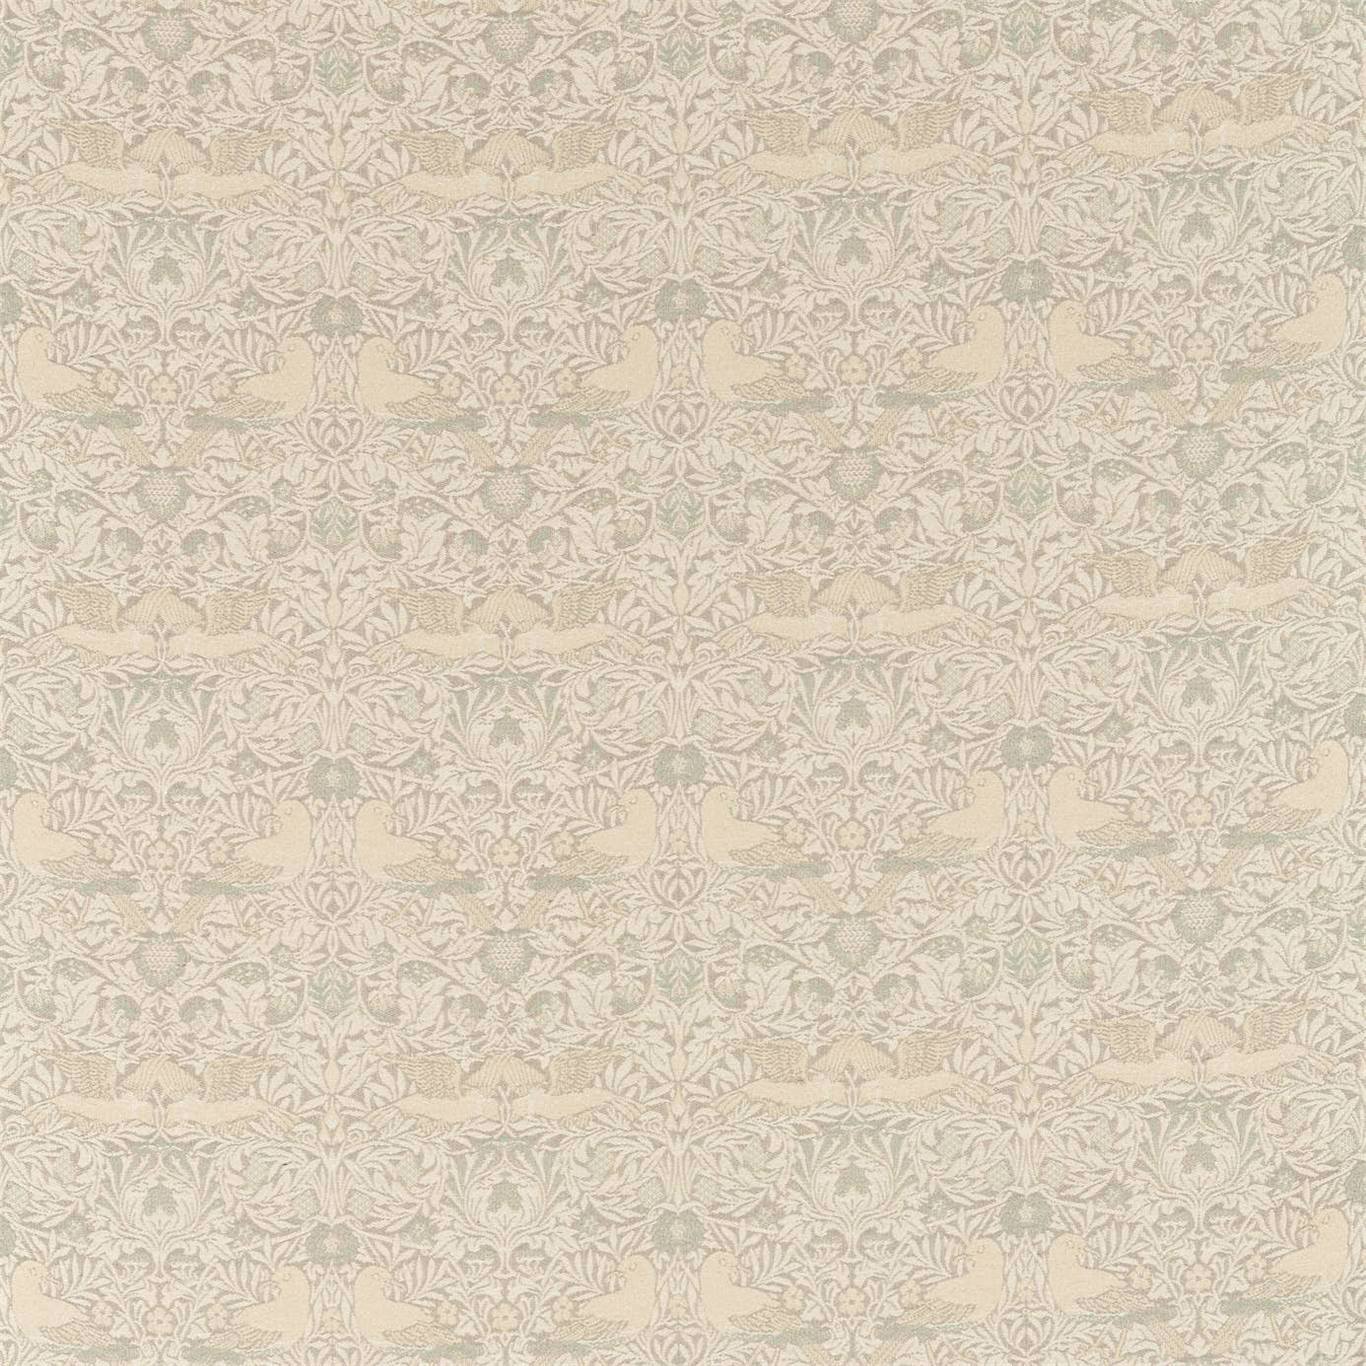 Bird Weave Fabric by Morris & Co. - DMLF236847 - Mineral